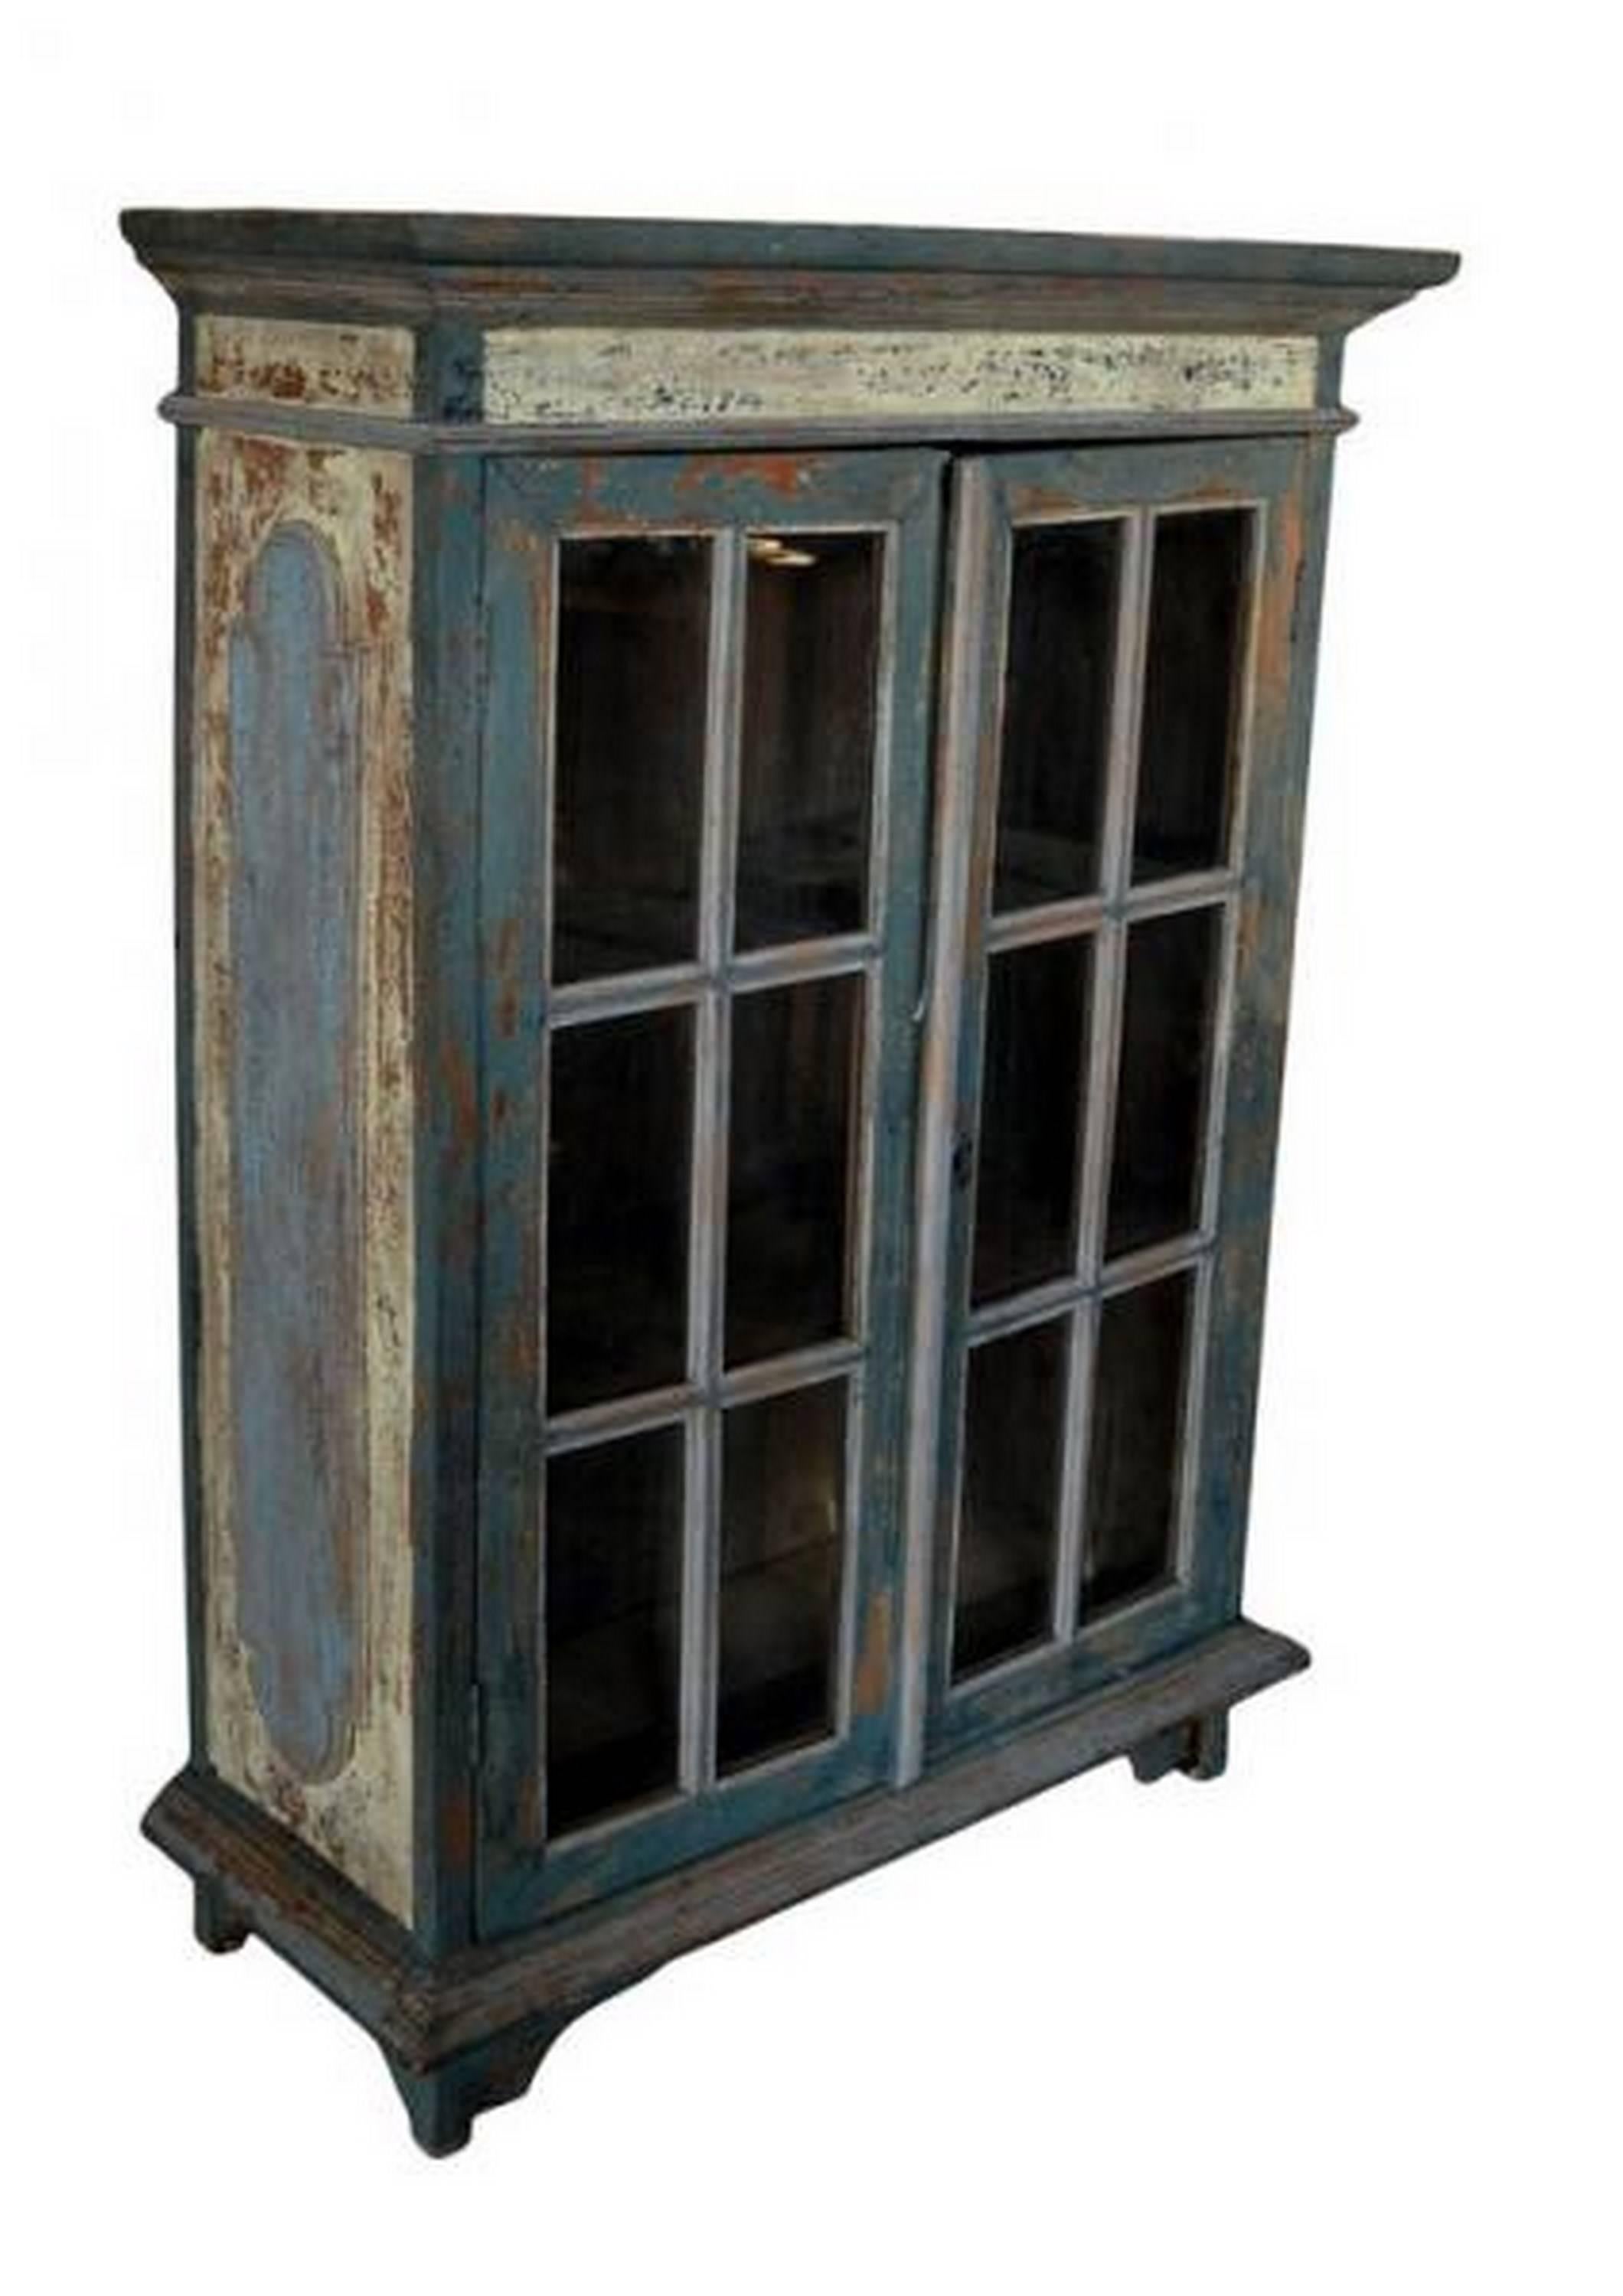 A rustic cabinet with glass doors hand carved in the Goa state of India. The rectangular shape of this cabinet is emphasized by the cornices on the top and bottom. The cabinet stands on four legs and is adorned with carved panels on its sides. This